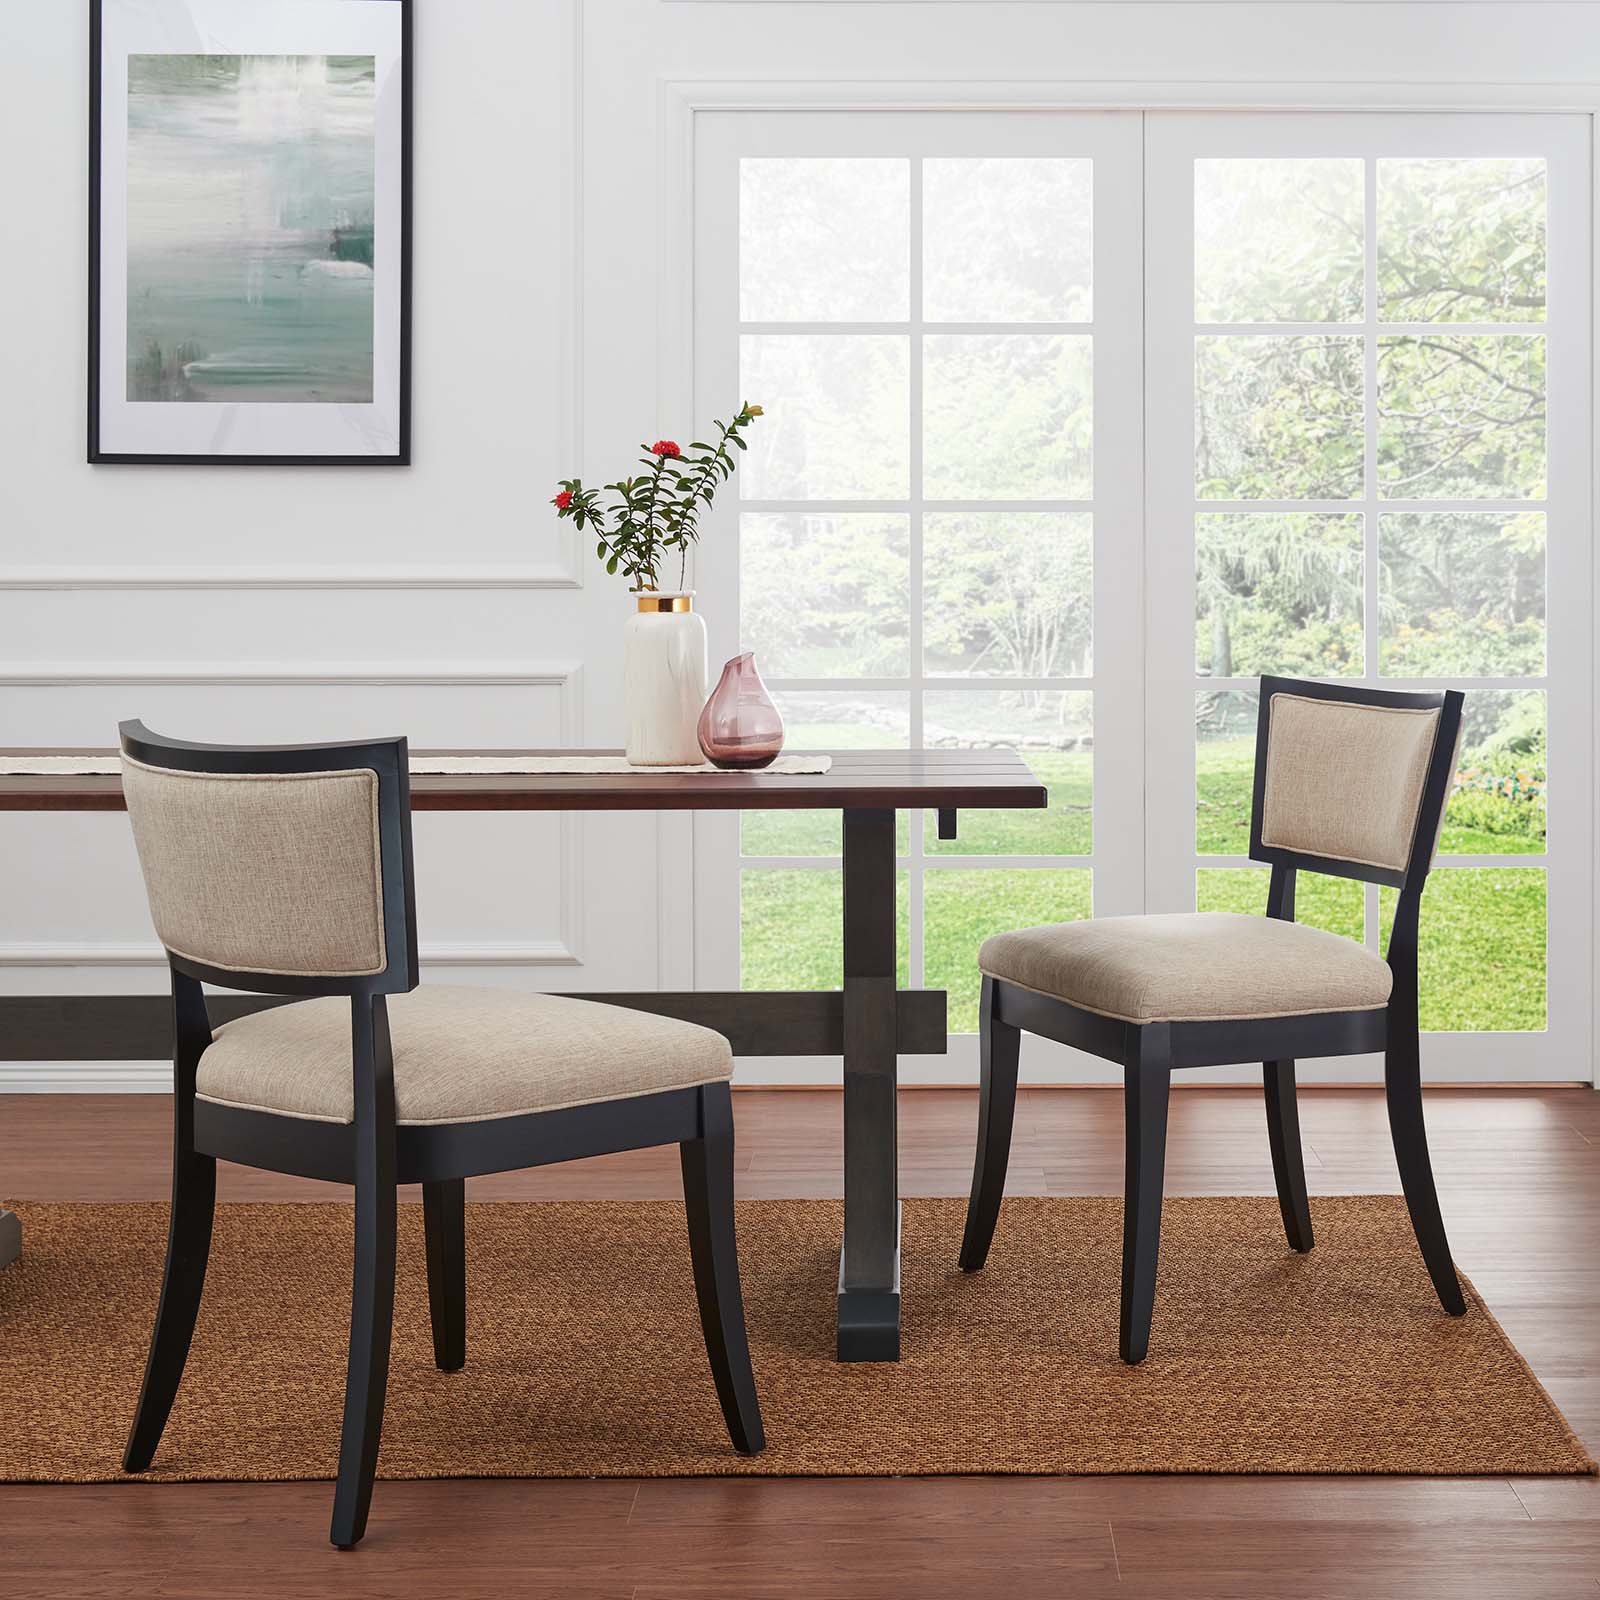 Pristine Upholstered Fabric Dining Chairs - Set of 2